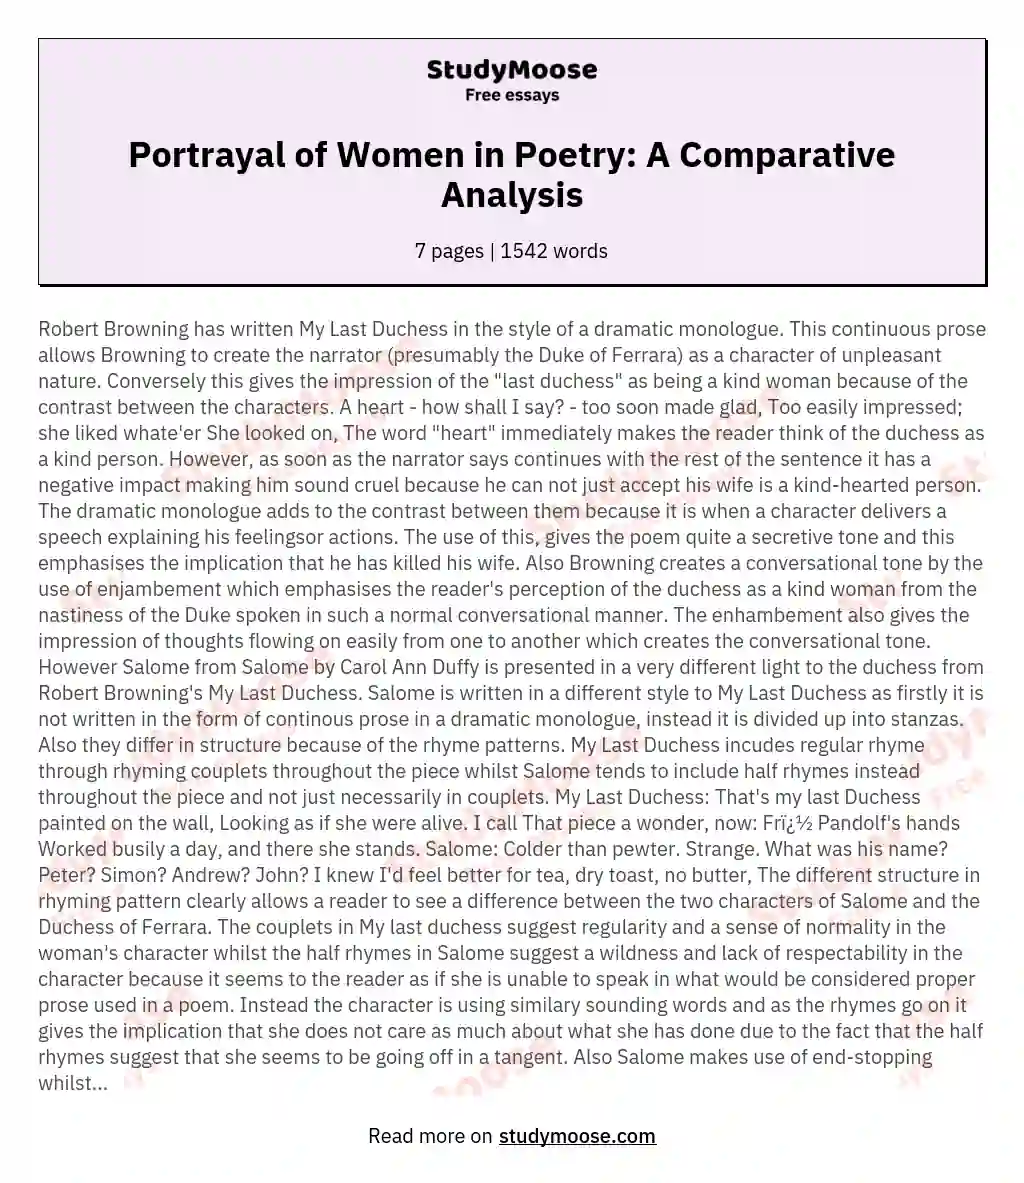 Portrayal of Women in Poetry: A Comparative Analysis essay